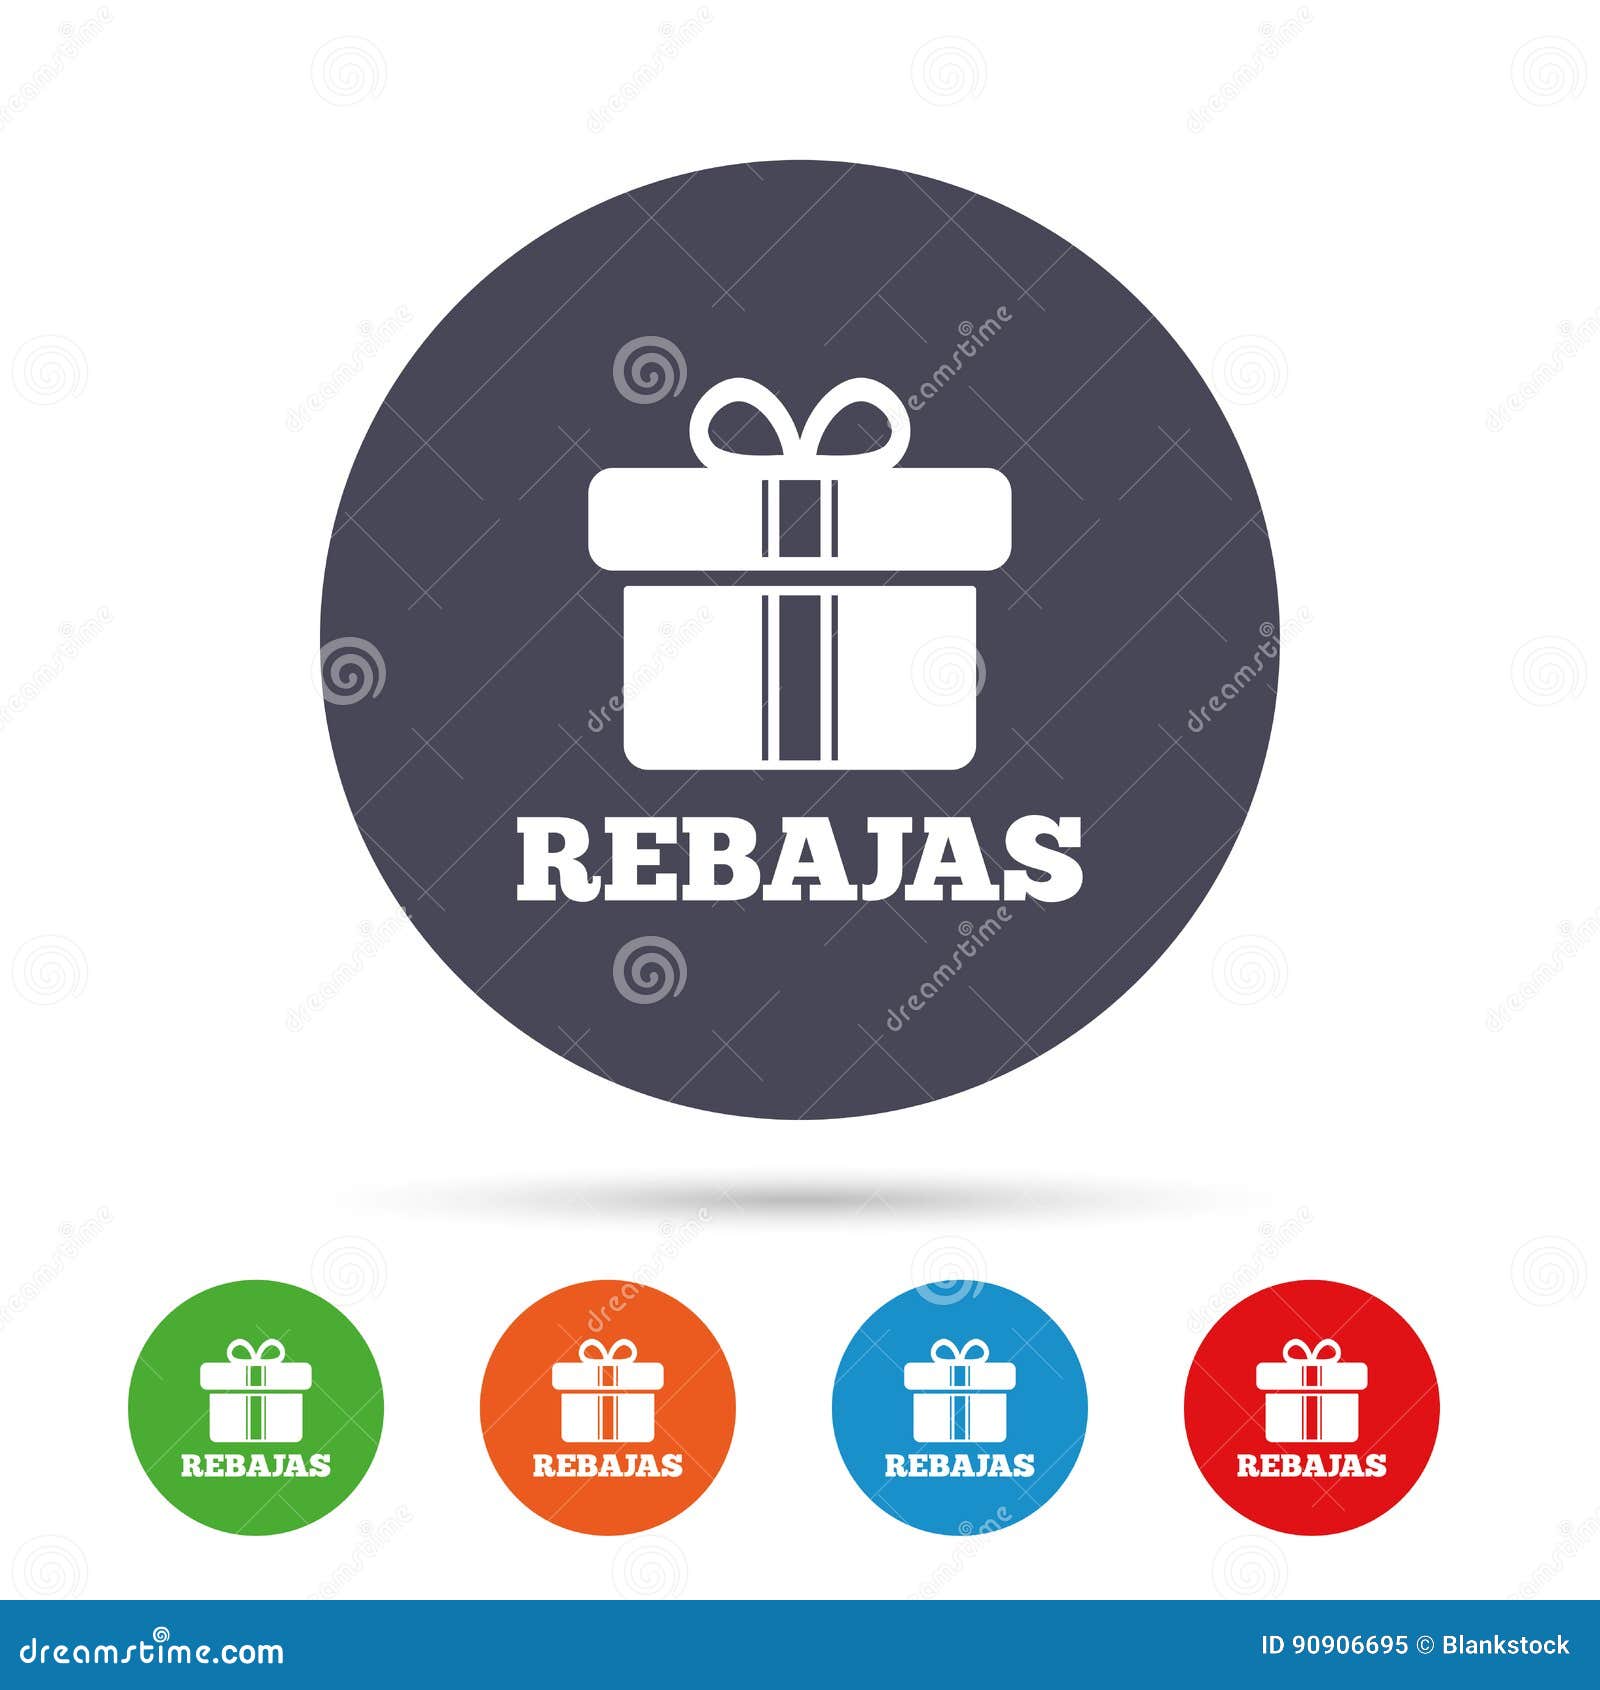 rebajas - discounts in spain sign icon. gift.